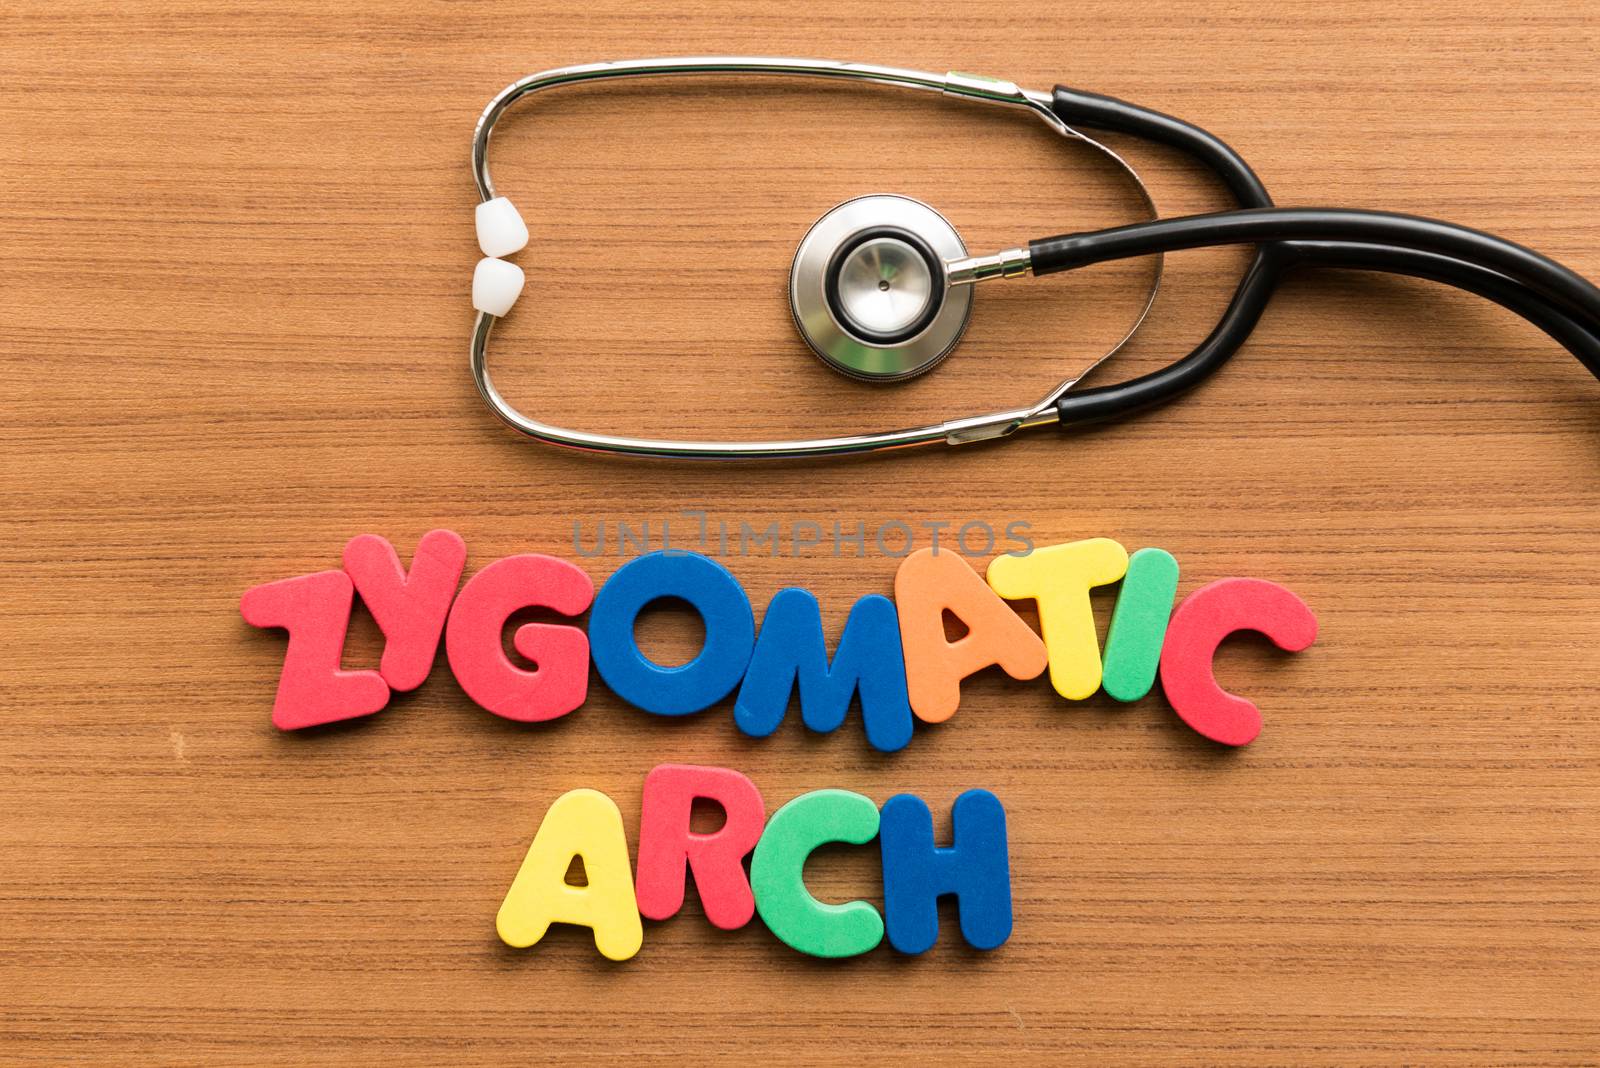 zygomatic arch colorful word with stethoscope on wooden background